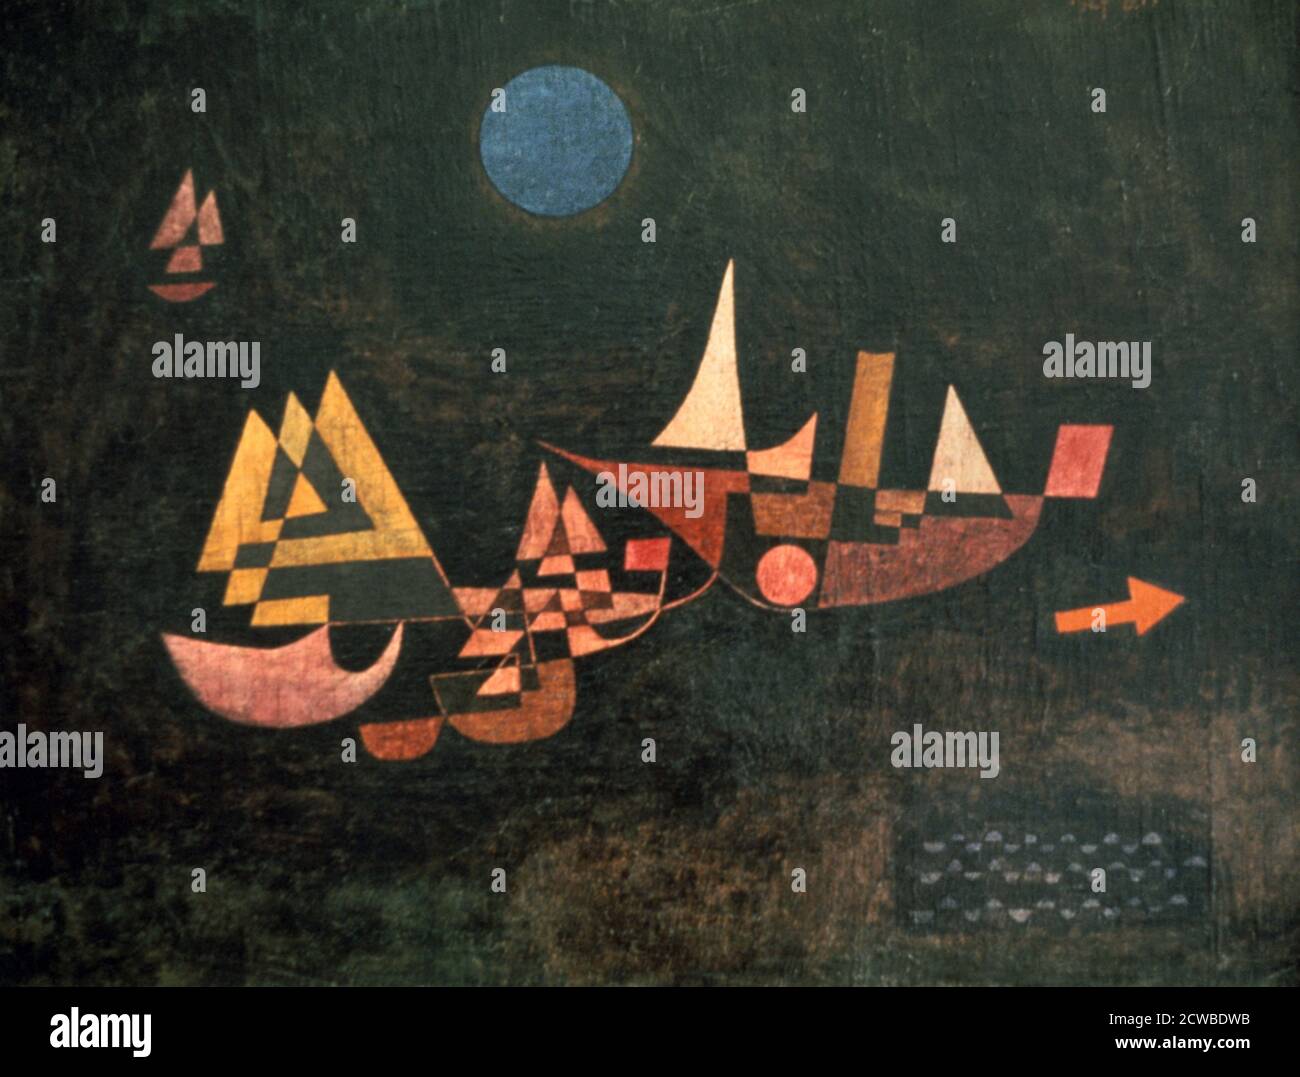 The Ships Depart', 1927. Artist: Paul Klee. Paul Klee (1879-1940) was a Swiss-born artist. His highly individual style was influenced by movements in art that included Expressionism, Cubism, and Surrealism. Stock Photo